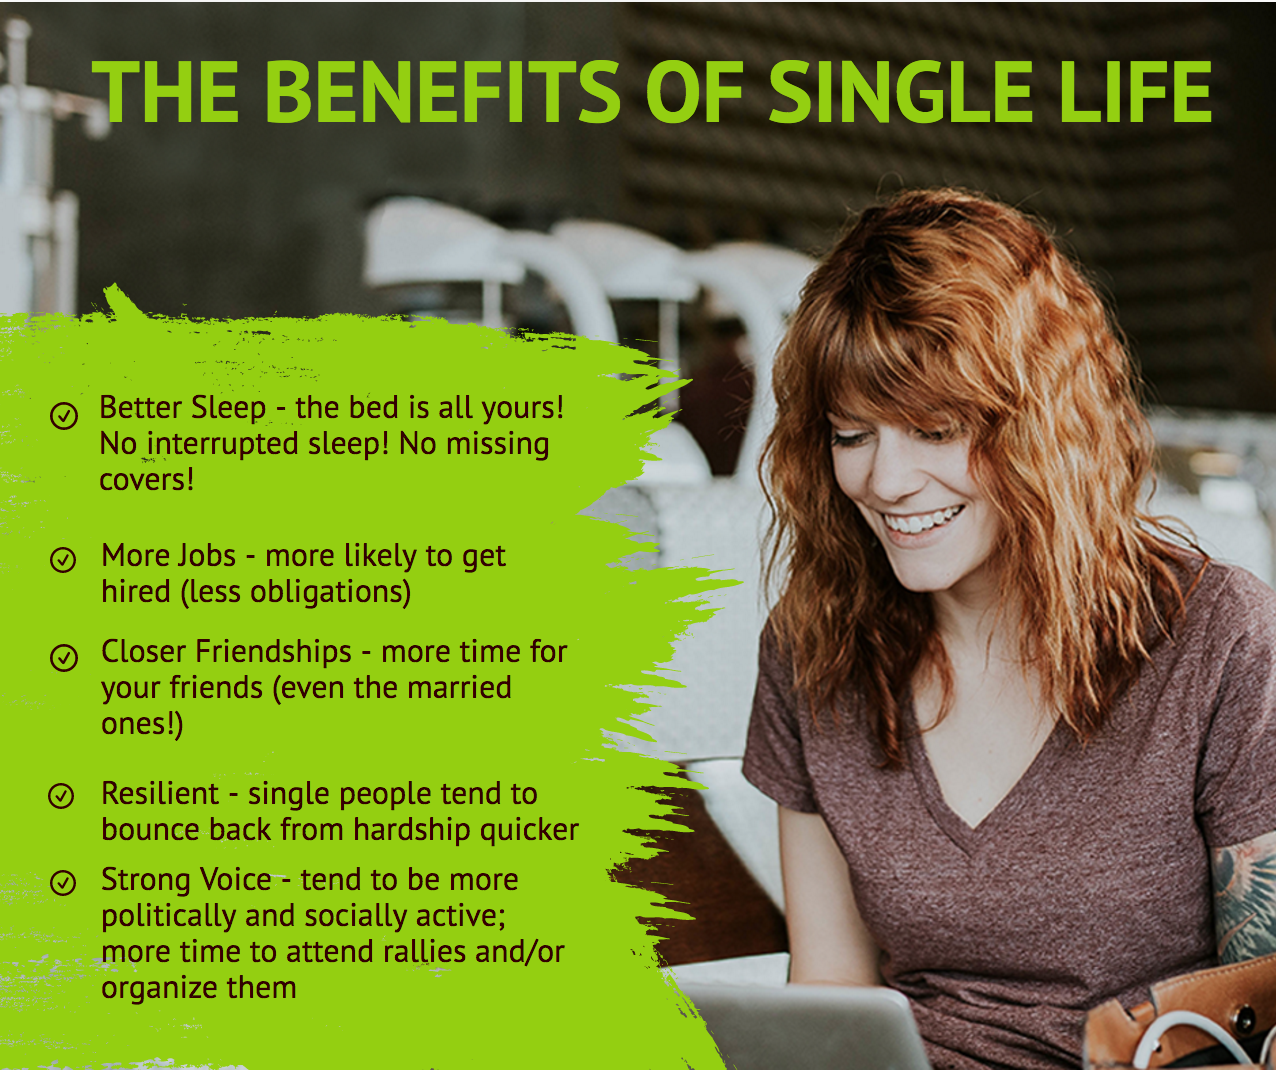 The benefits of single life